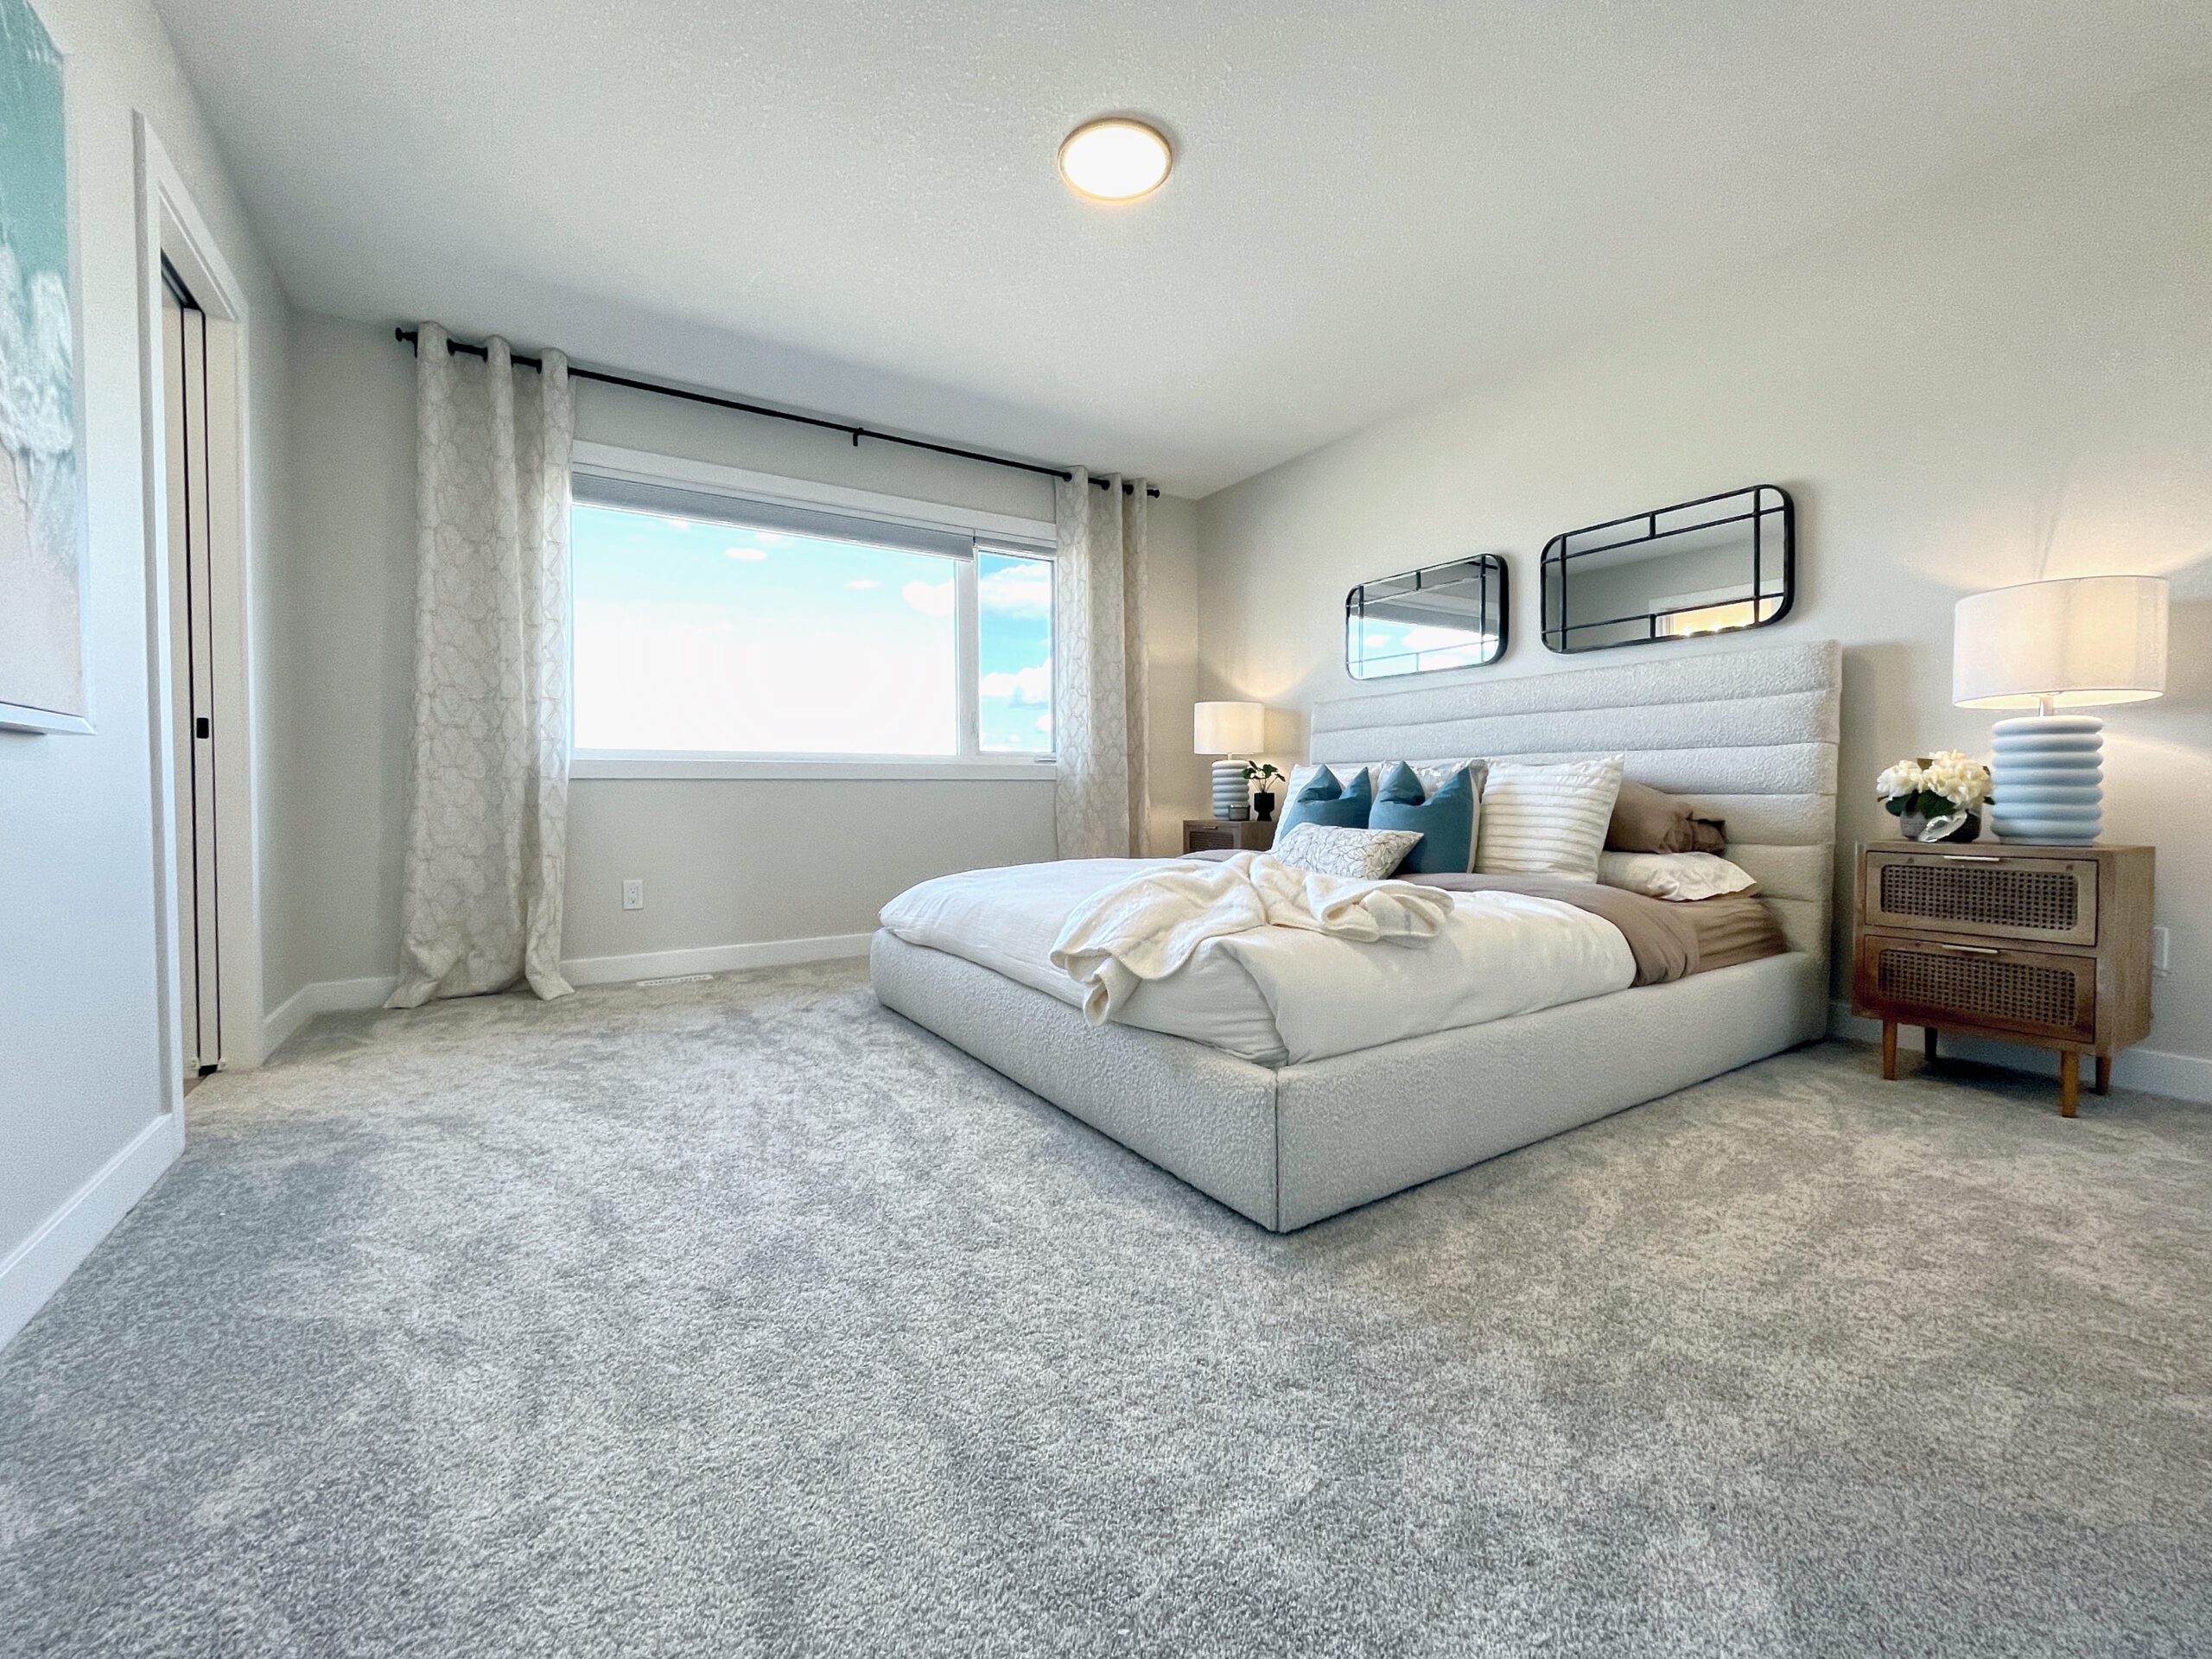 A bedroom with gray carpet and a large bed.